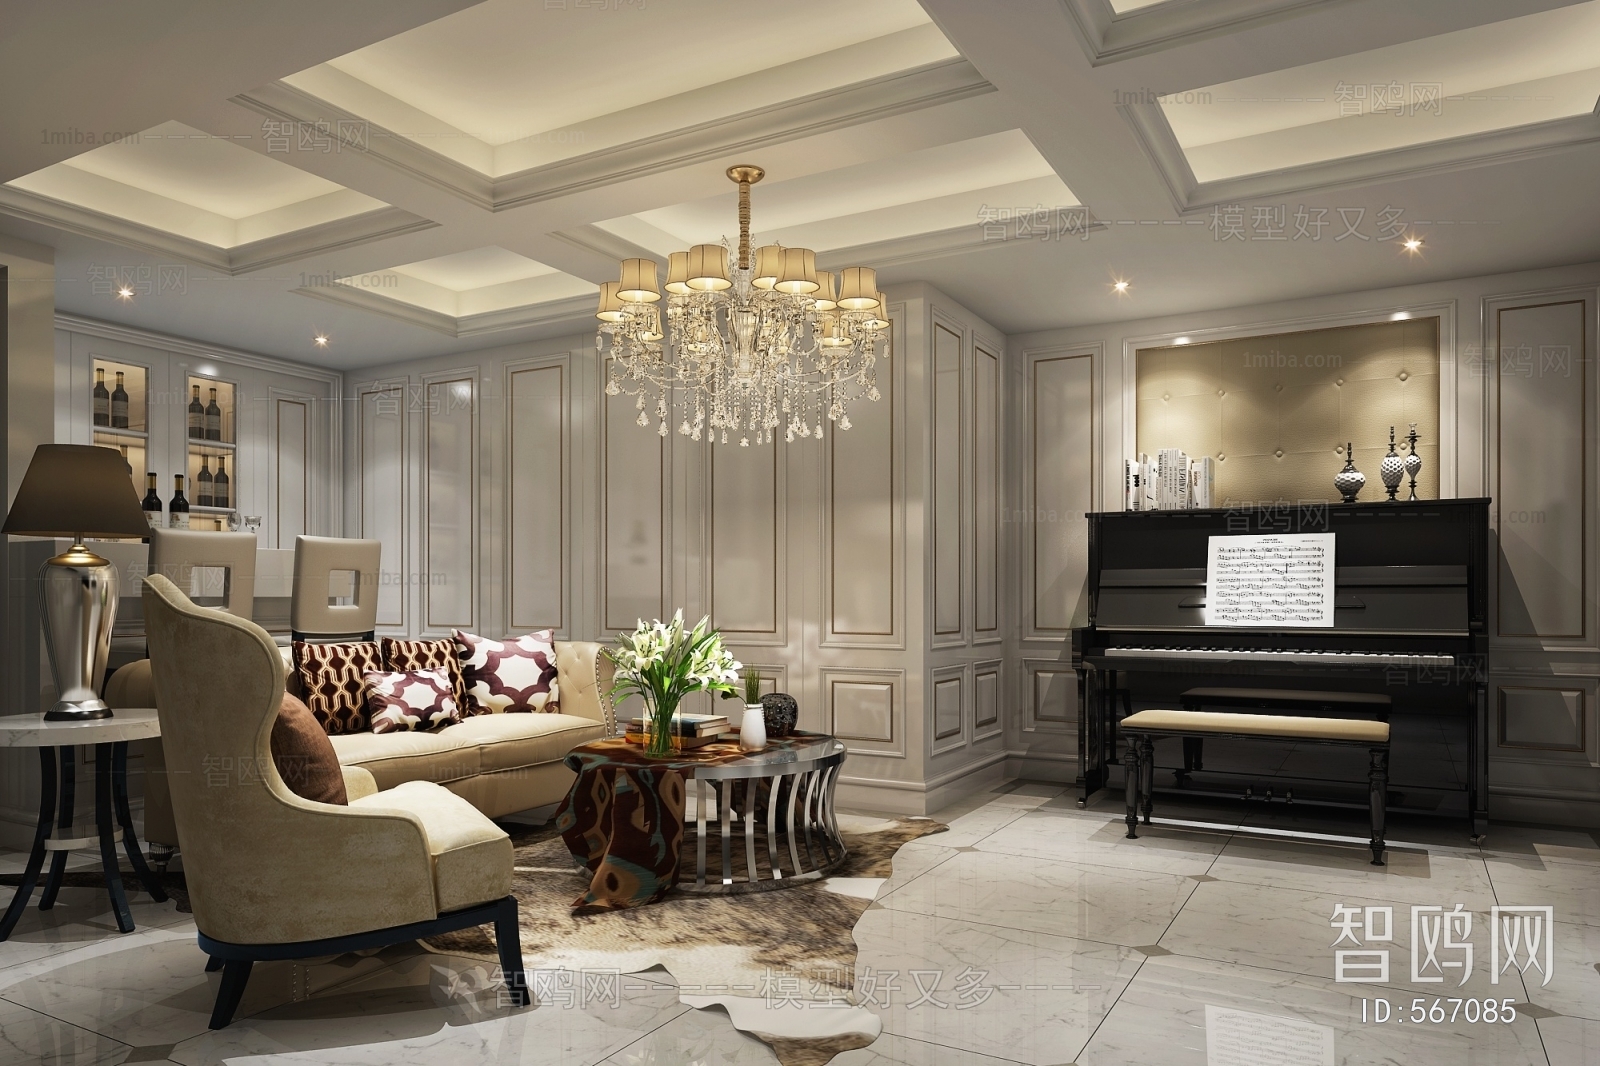 New Classical Style Rest And Entertainment